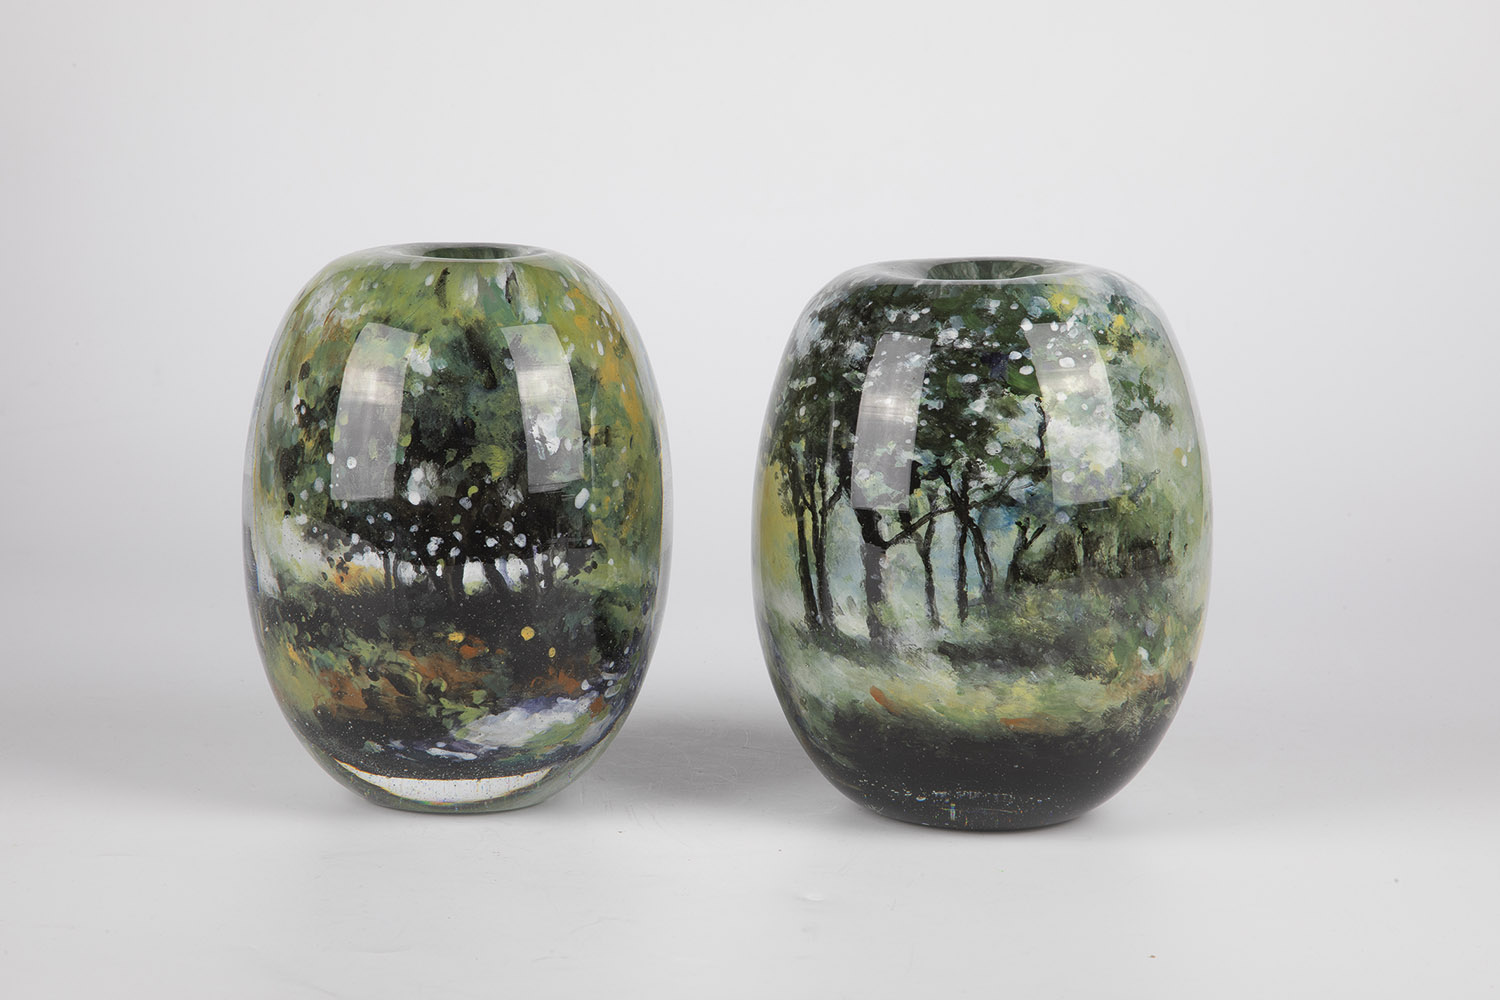 Pair of vases in Graal technique Rainer Metzger, Frauenau Colourless glass with polychrome